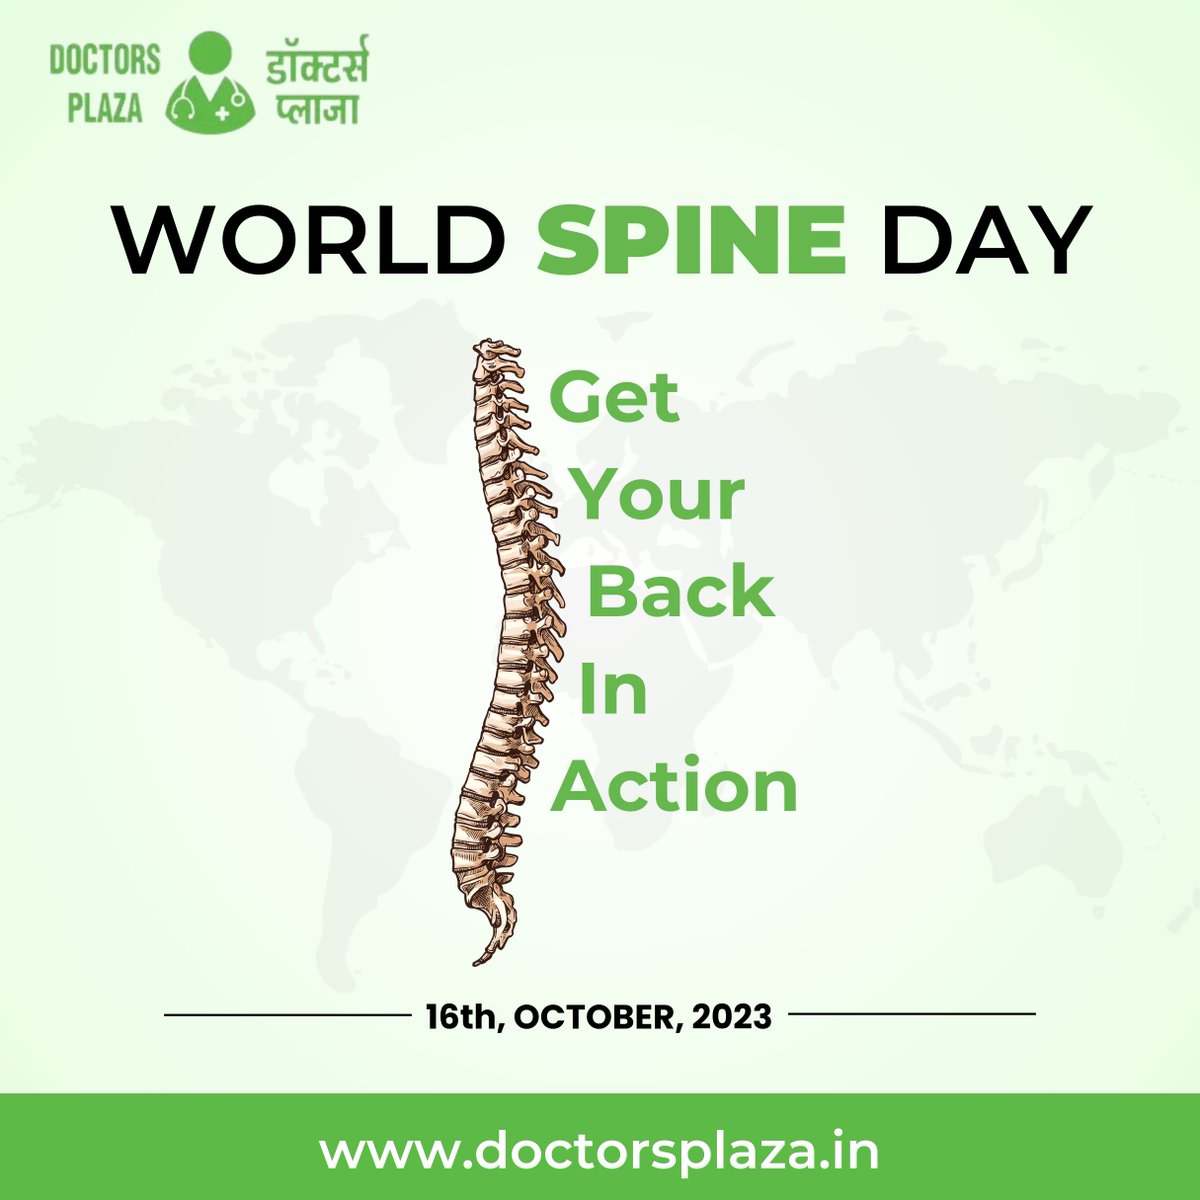 Happy #SpineDay! Let's celebrate the backbone of our body today. Remember to maintain good posture, stay active, and prioritize spine health for a pain-free life.

#DoctorsPlaza #SpineDay #WorldSpineDay #BackHealth #SpineAwareness #HealthySpine #BackPainAwareness #BackCare